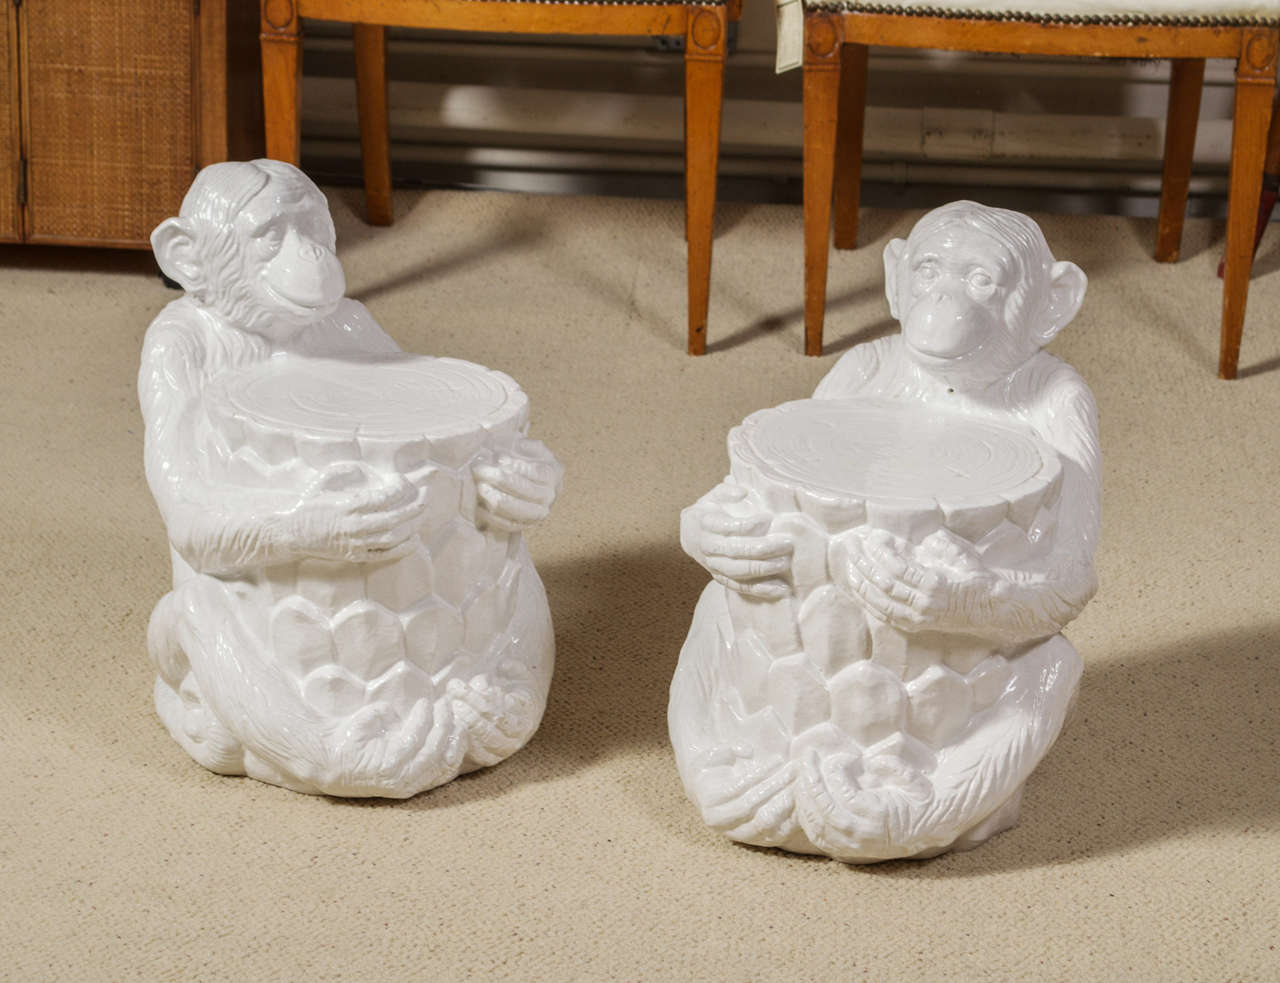 A set of circa 1970's Italian (unmarked) White ceramic monkey garden stools. This pair will liven up your space indoors or out.
Saturday Sale! Price was reduced by 50% from $1,450